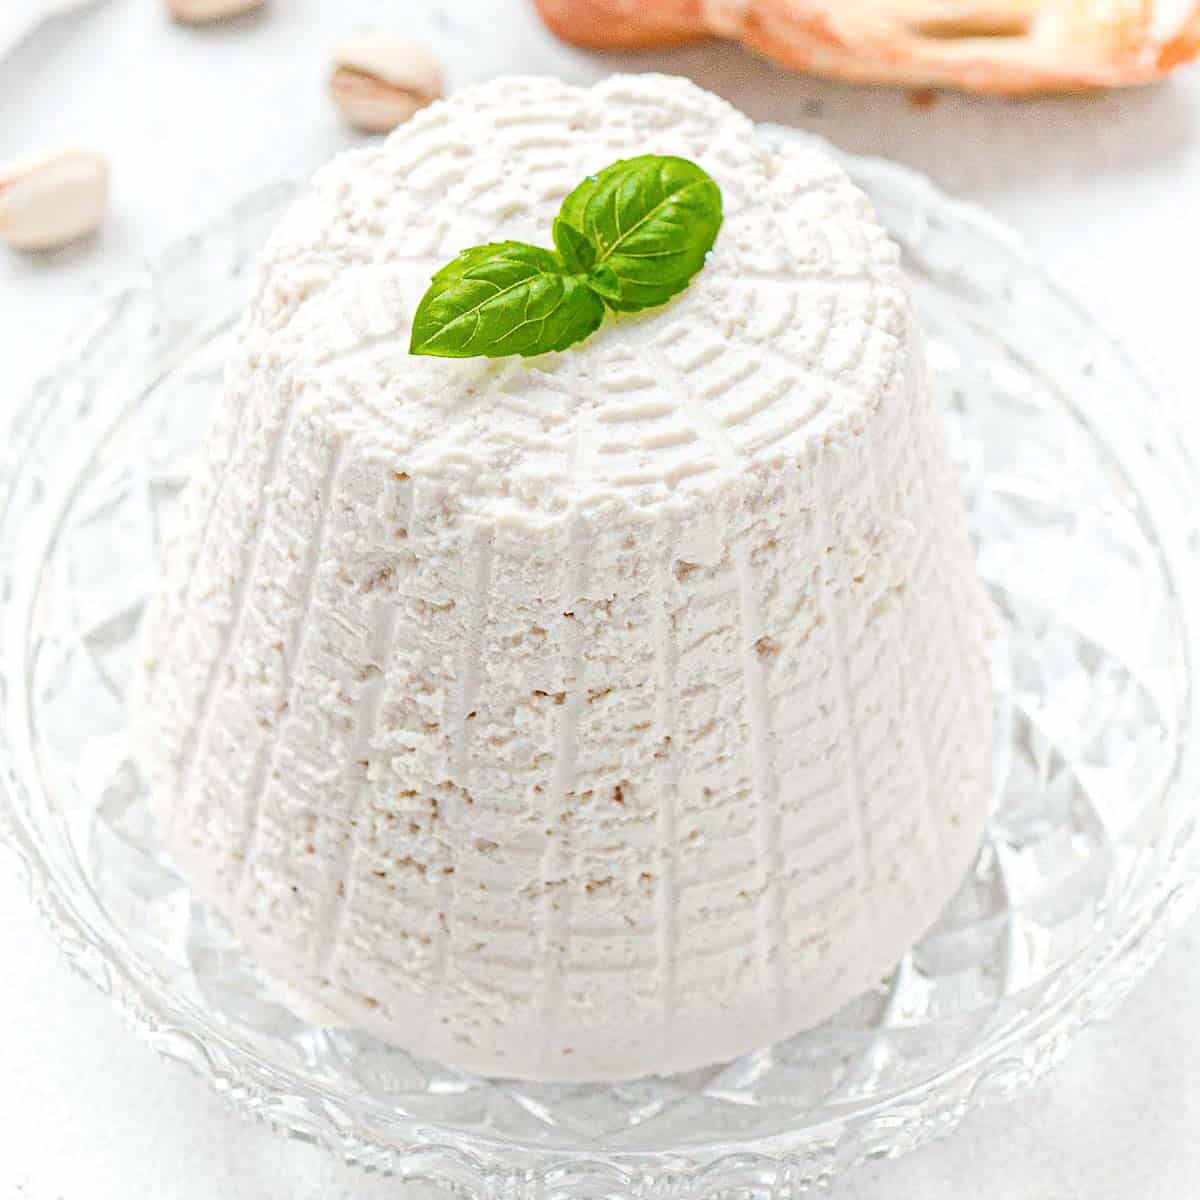 Vegan Ricotta with just 3 ingredients and no nuts